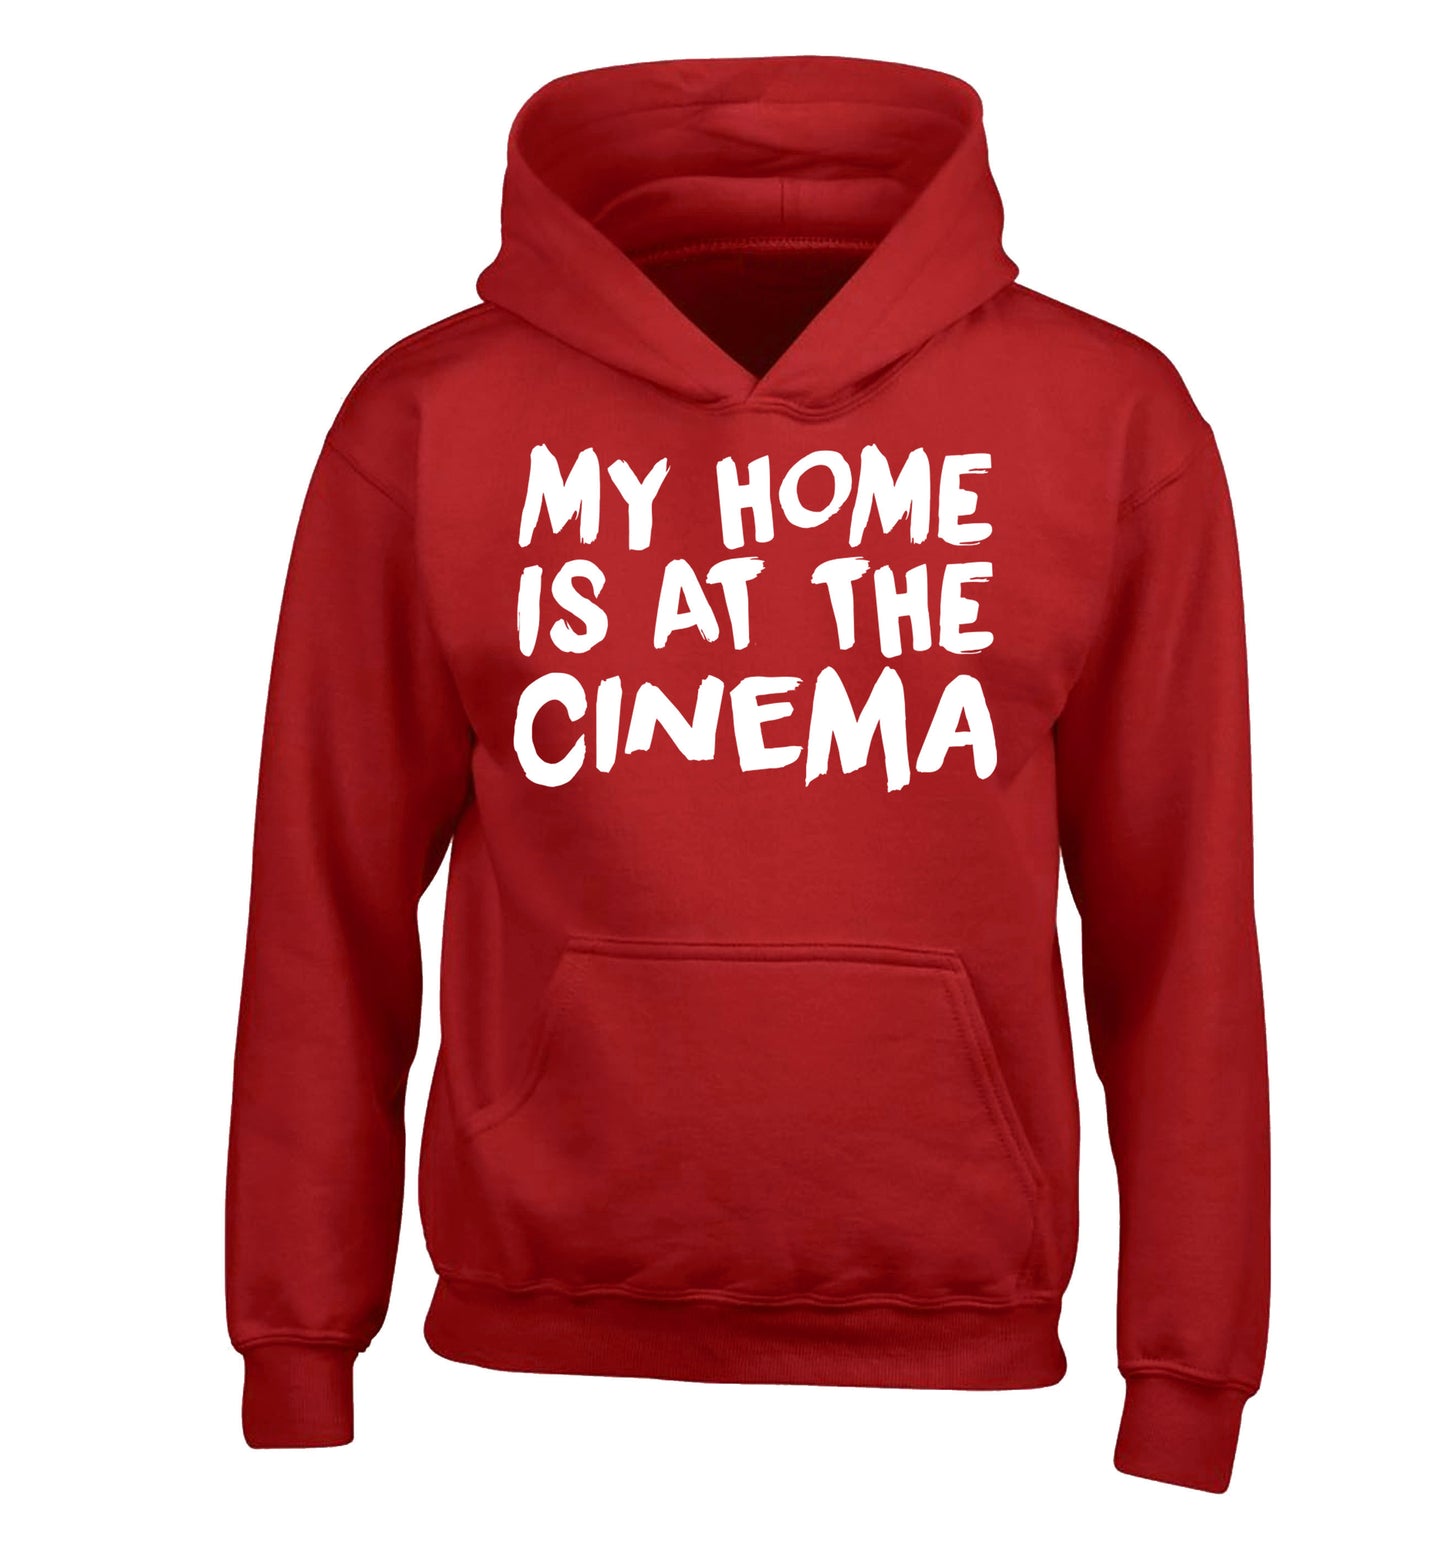 My home is at the cinema children's red hoodie 12-14 Years